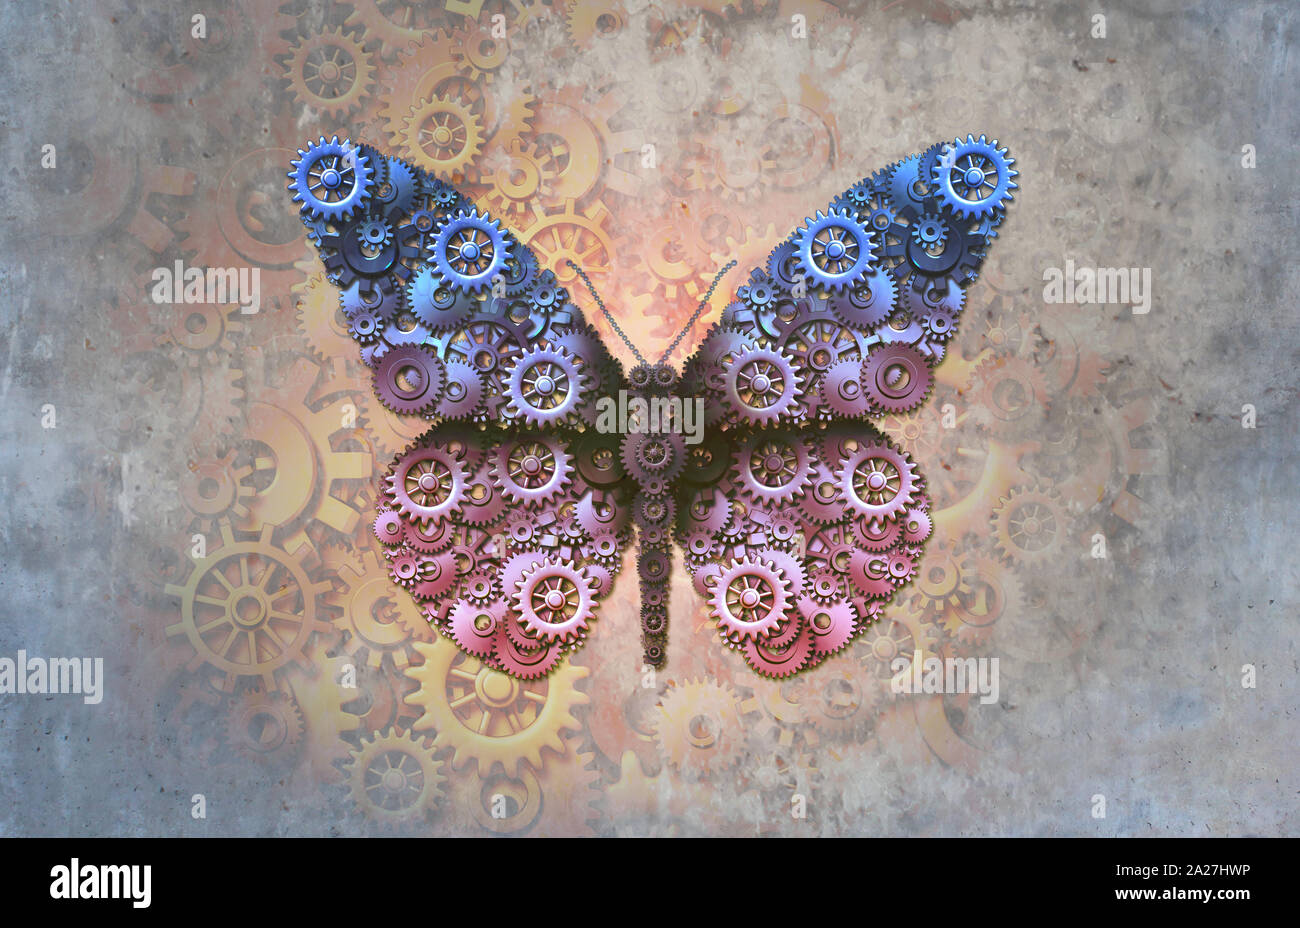 Steampunk butterfly as a steam punk insect with open wings made of gears and cog wheels as an abstract mechanical engineering  or science fiction vin Stock Photo